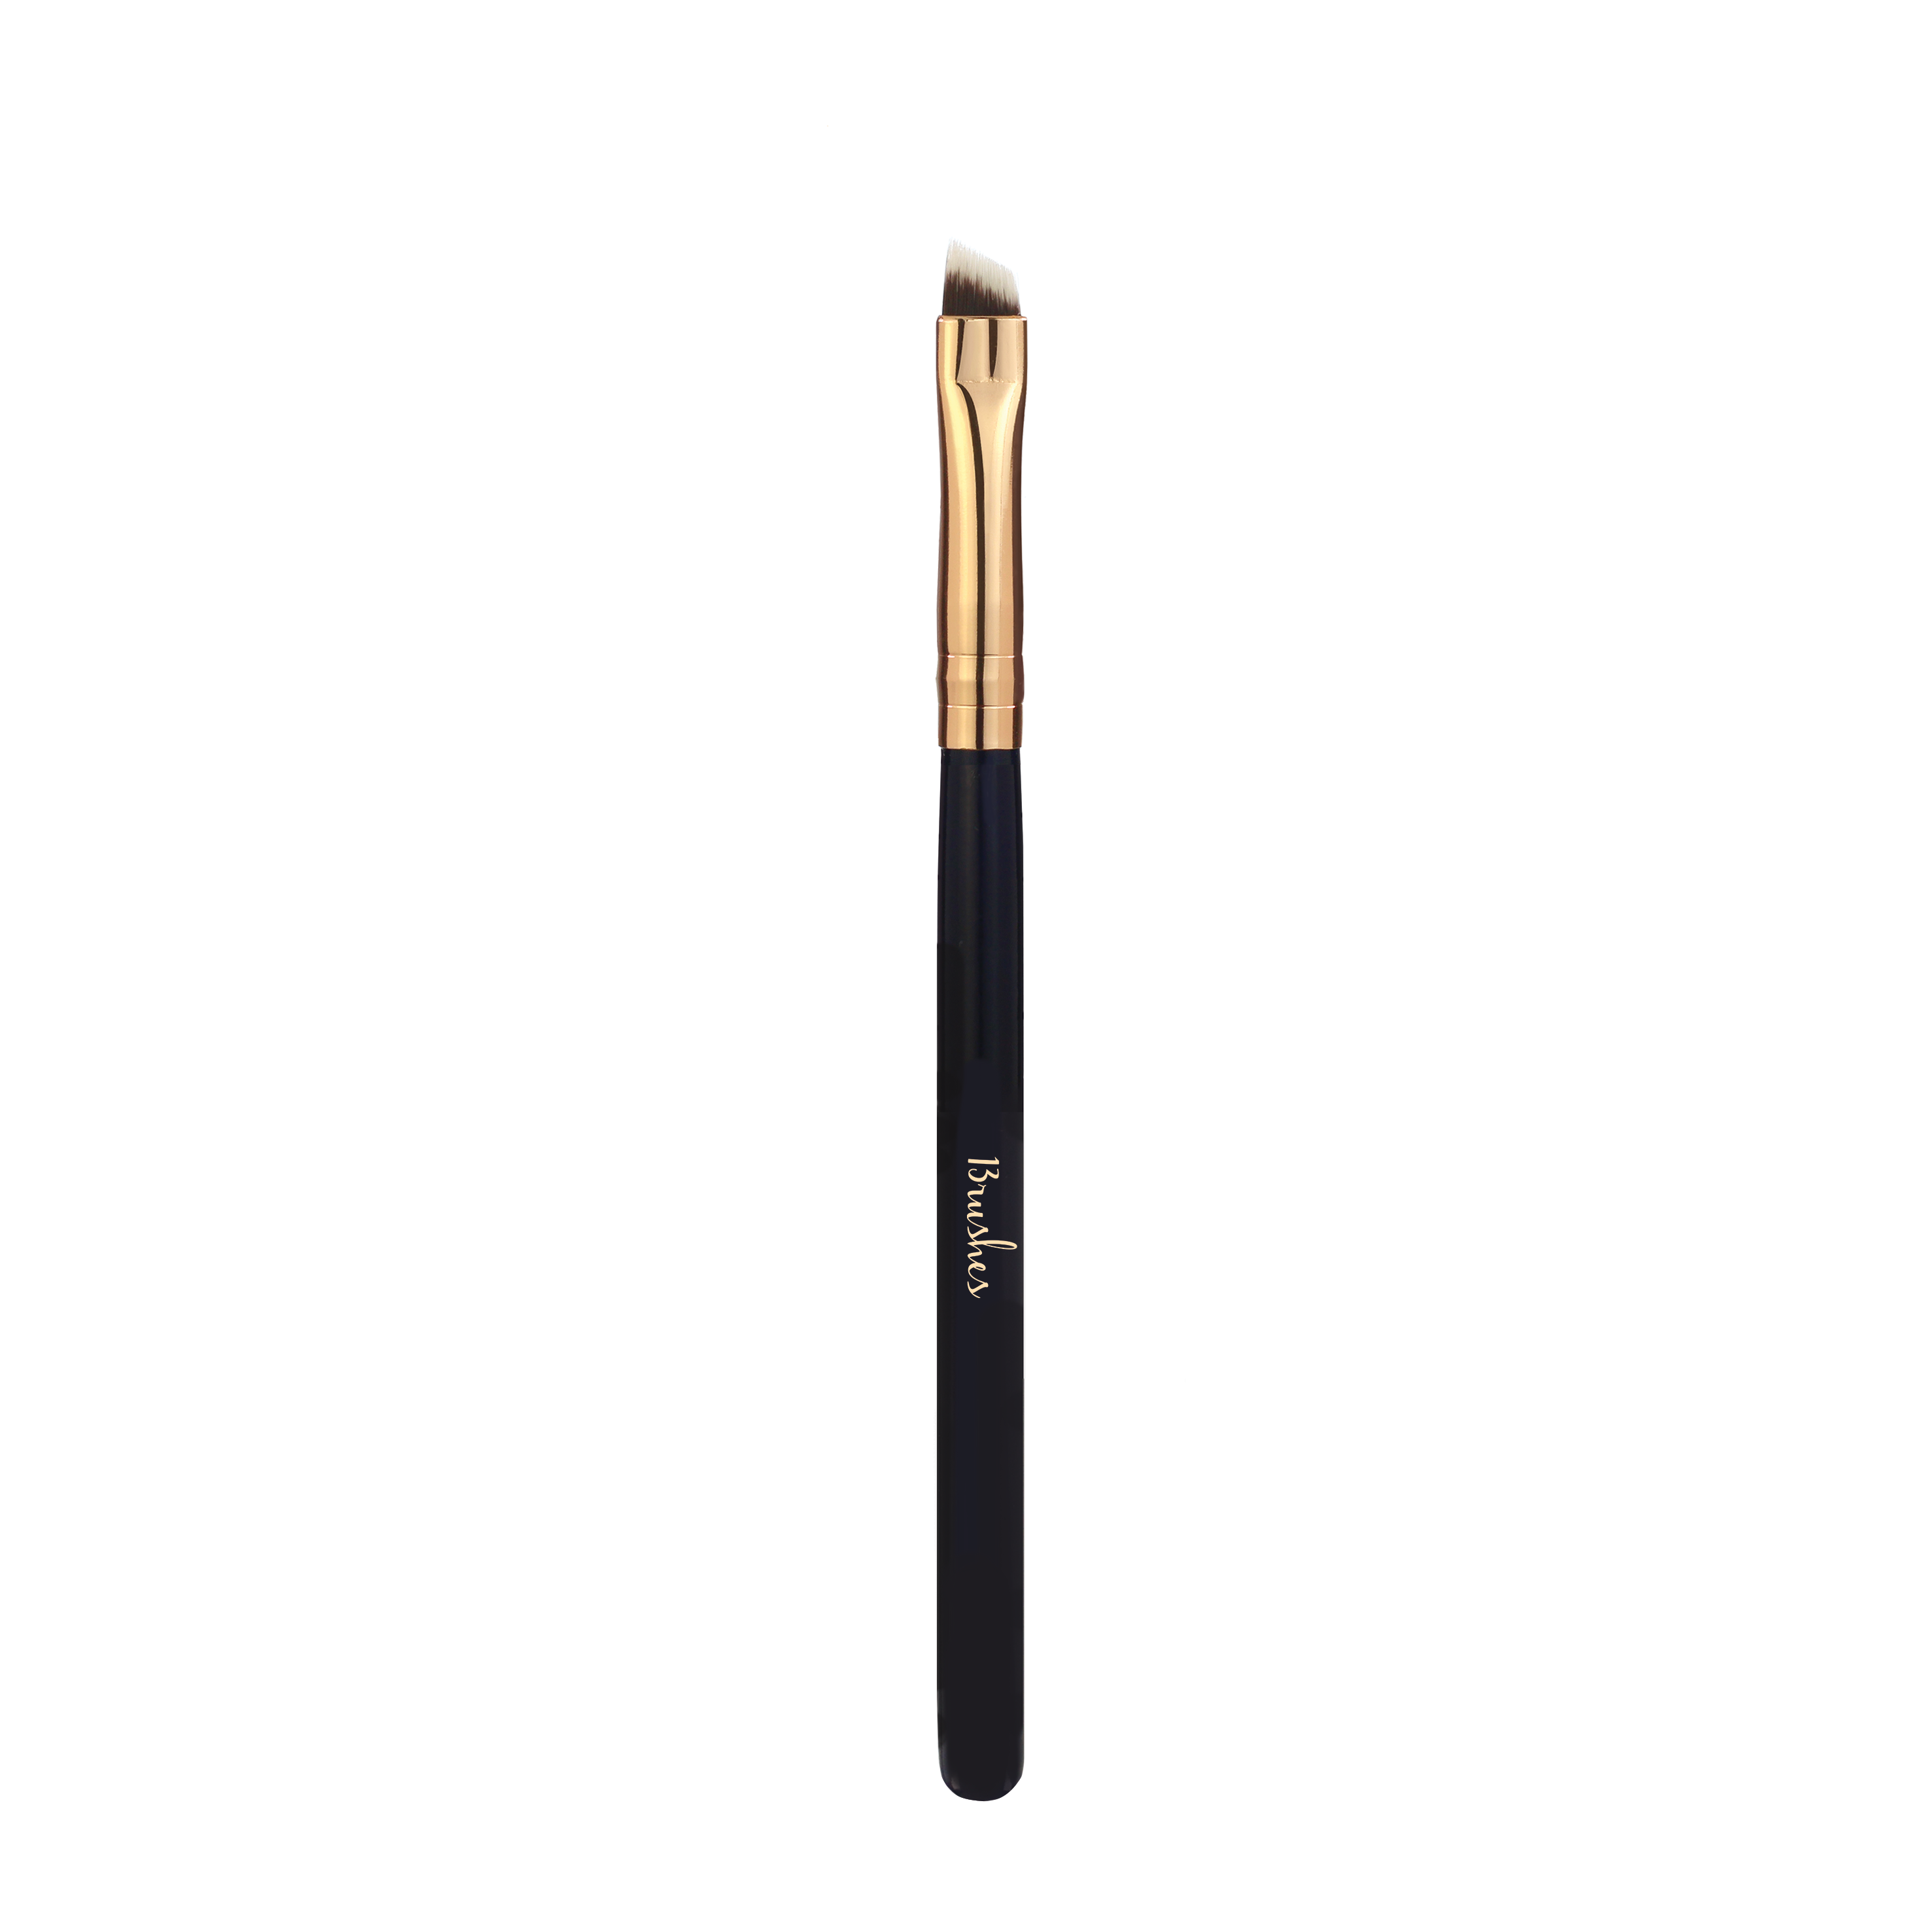 Angled Brow (mini) - 13rushes - Singapore's best makeup brushes